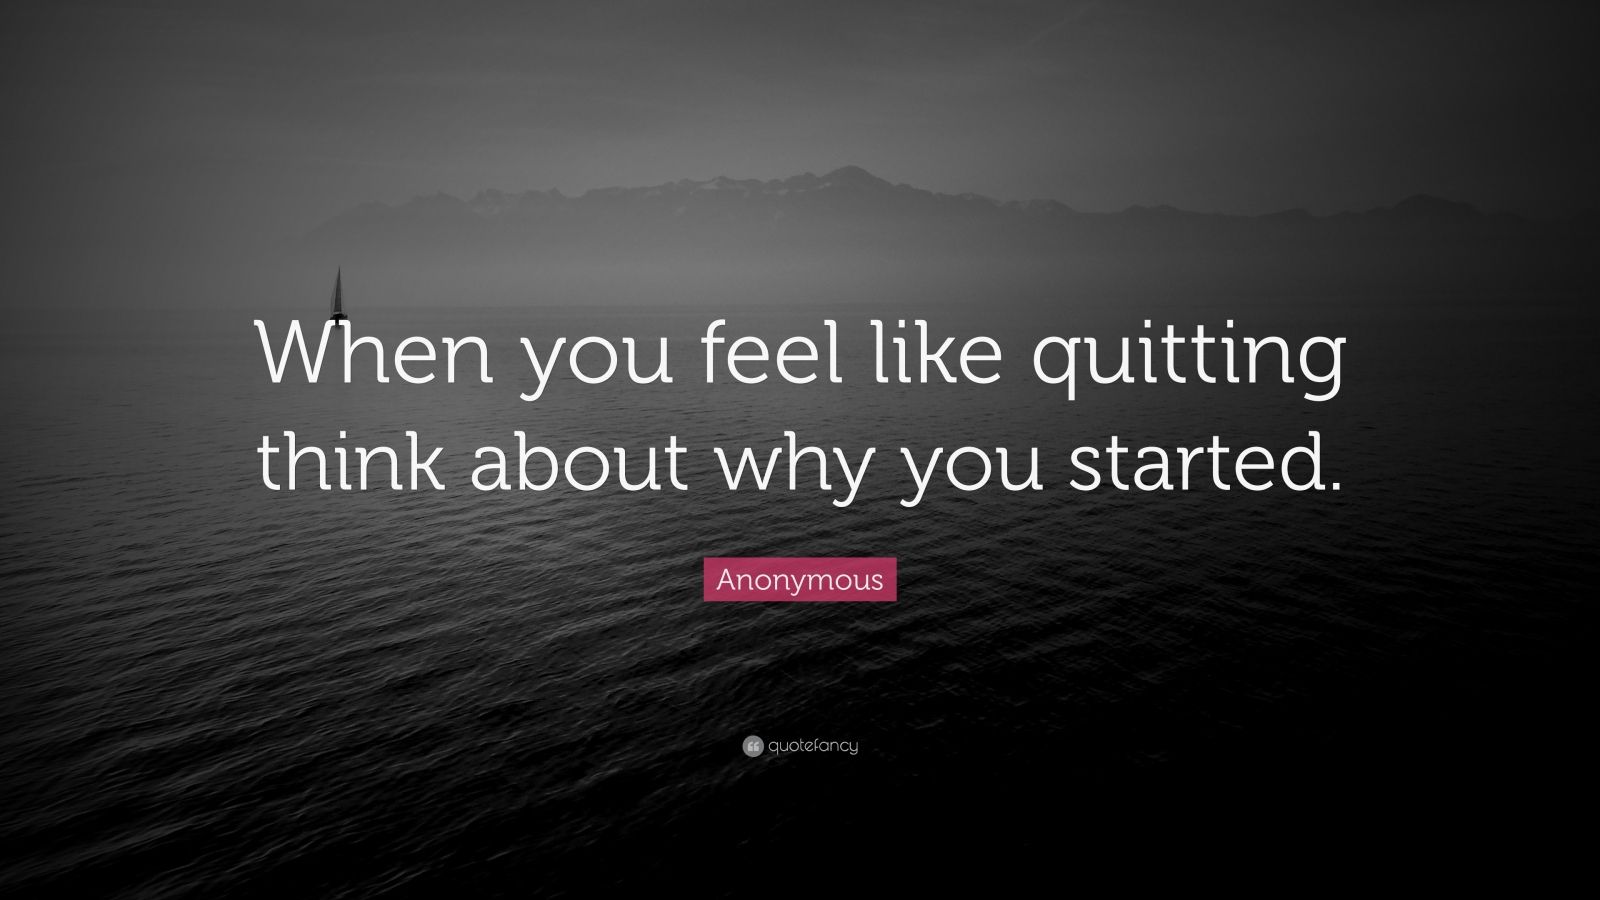 Anonymous Quote: “When you feel like quitting think about why you